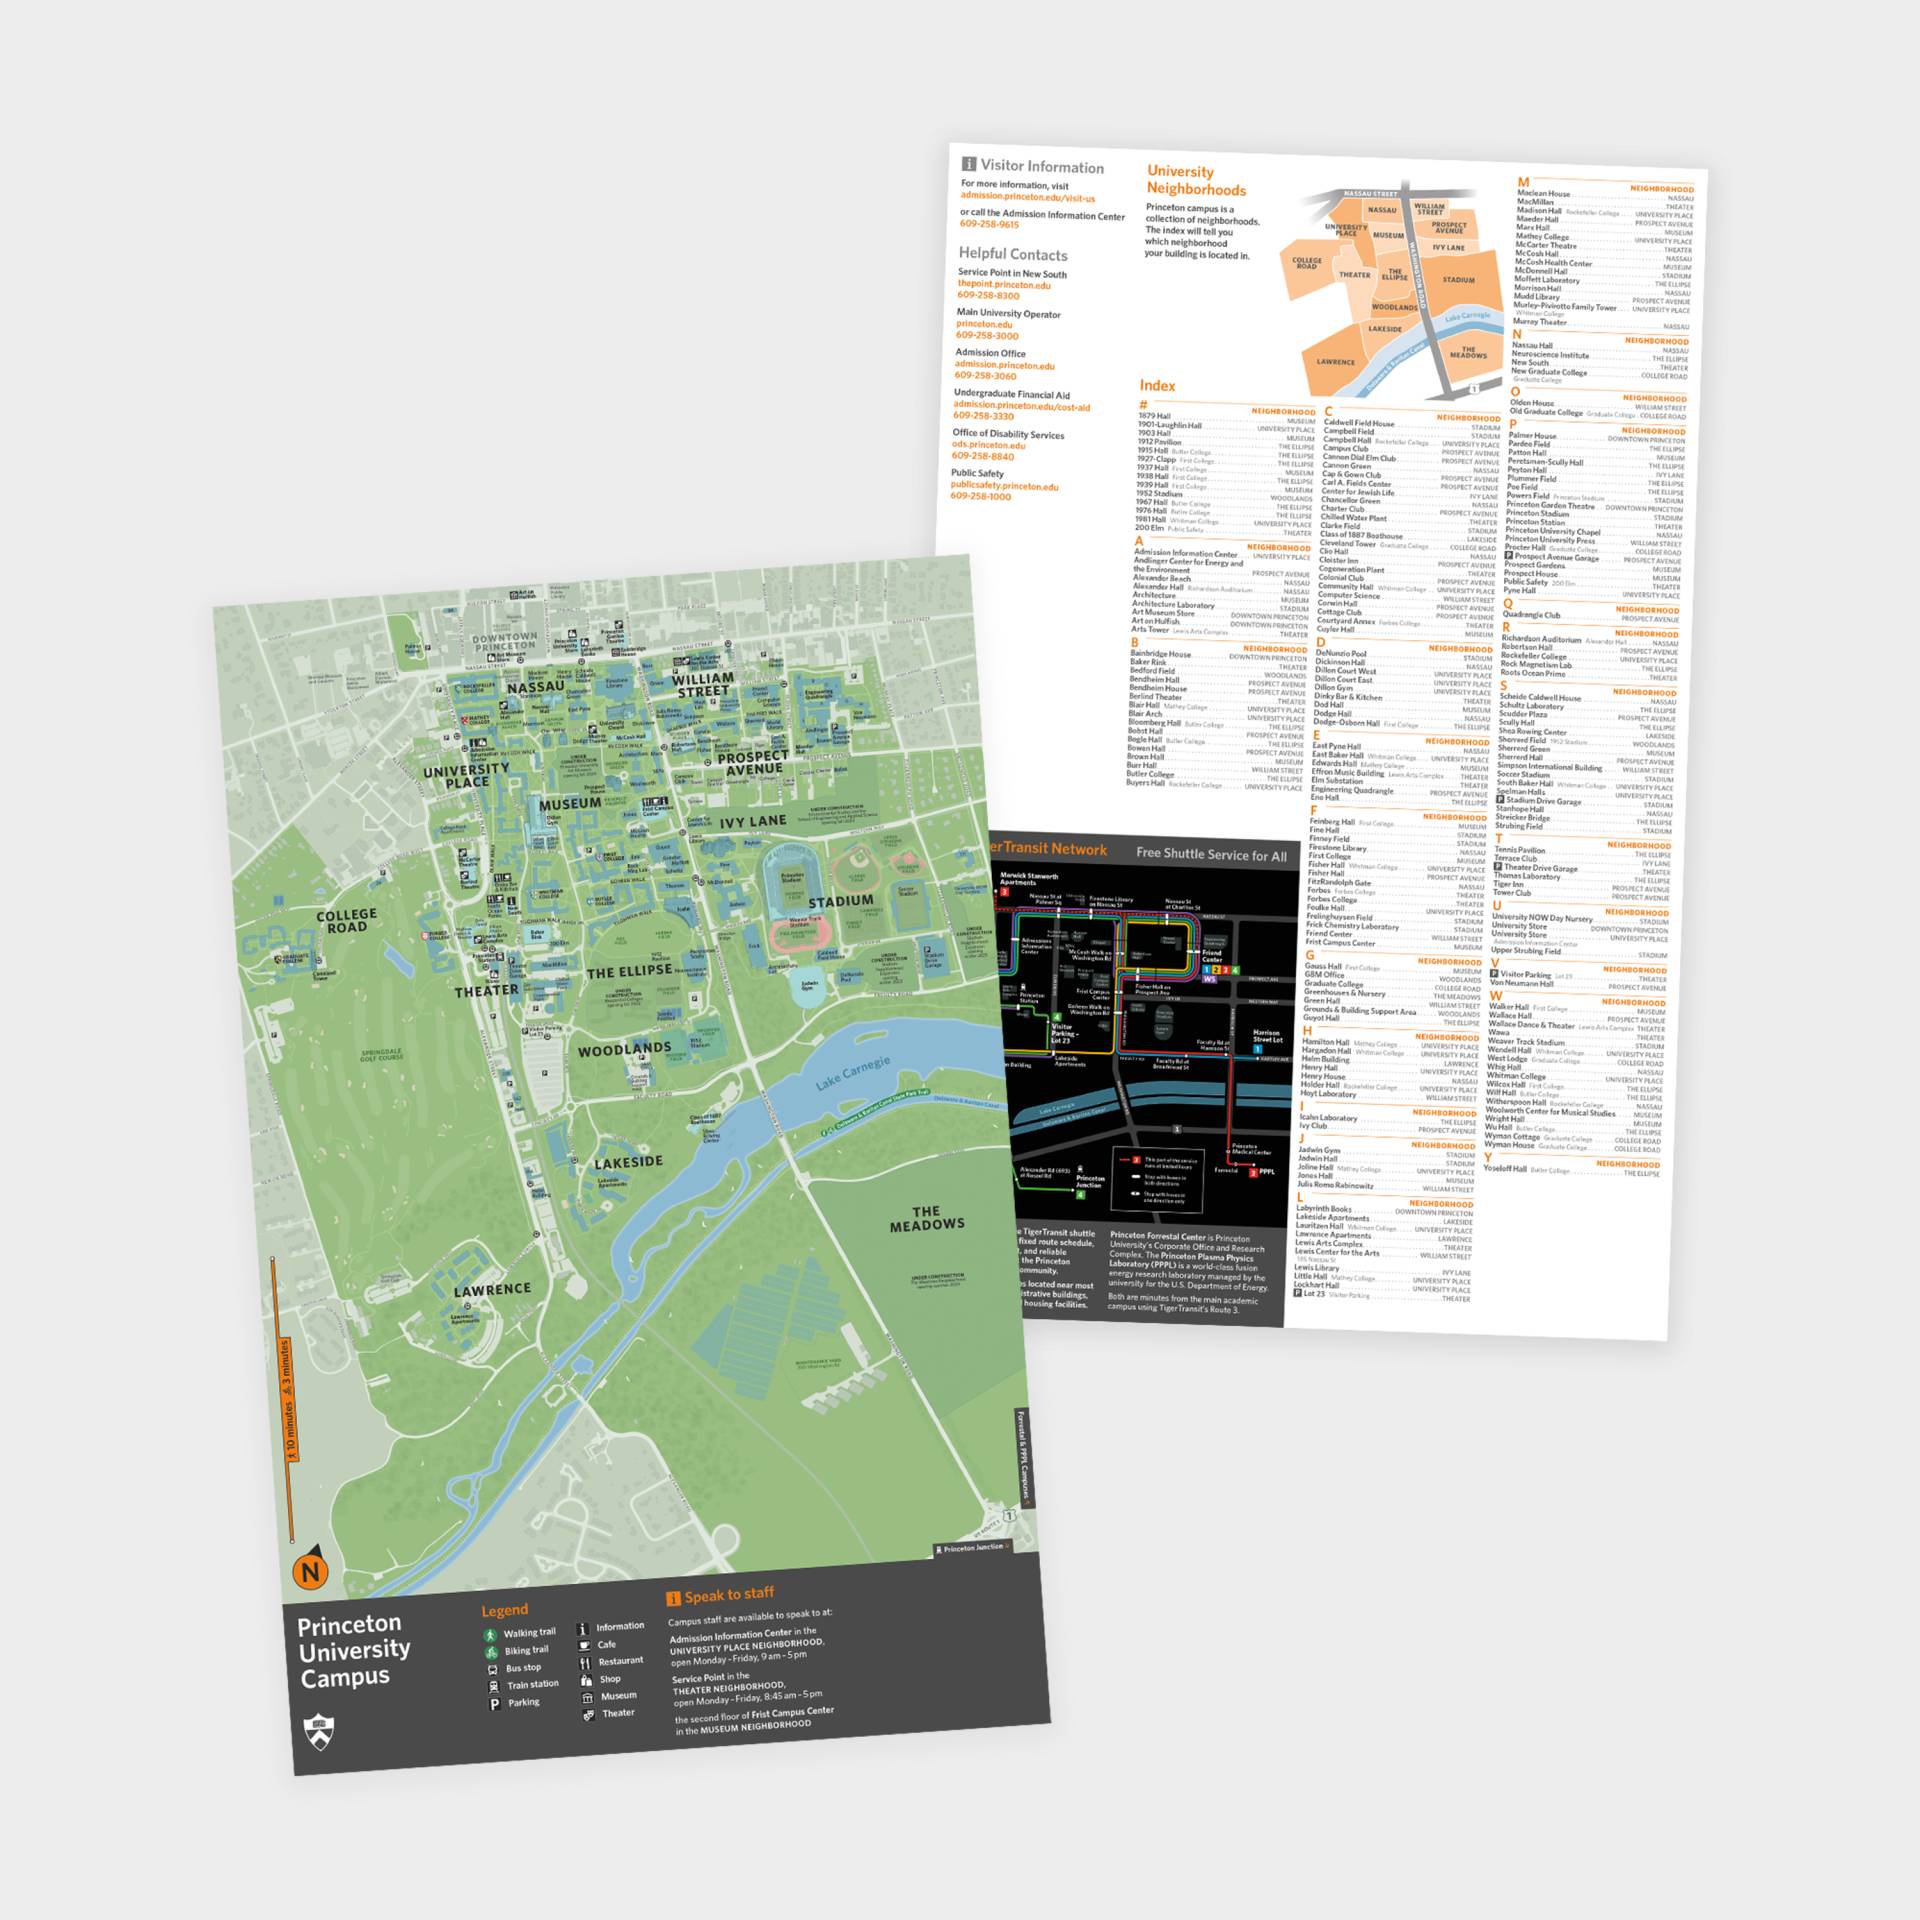 Printed visitors maps of the campus